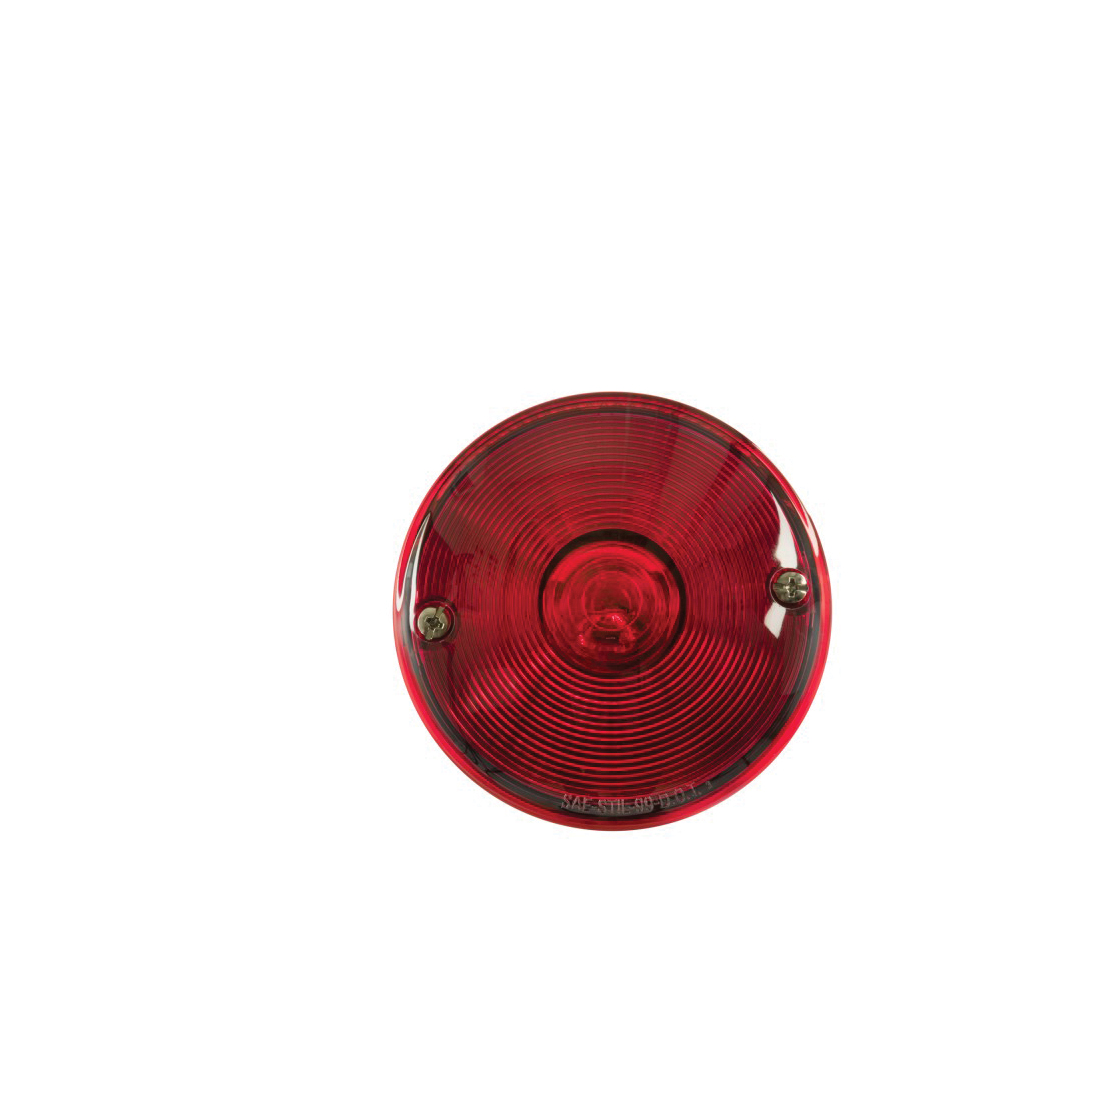 Blazer B55UW Tail Light with Metal Mounting Plate, Incandescent Lamp, Red Housing, Acrylic Lens - 4